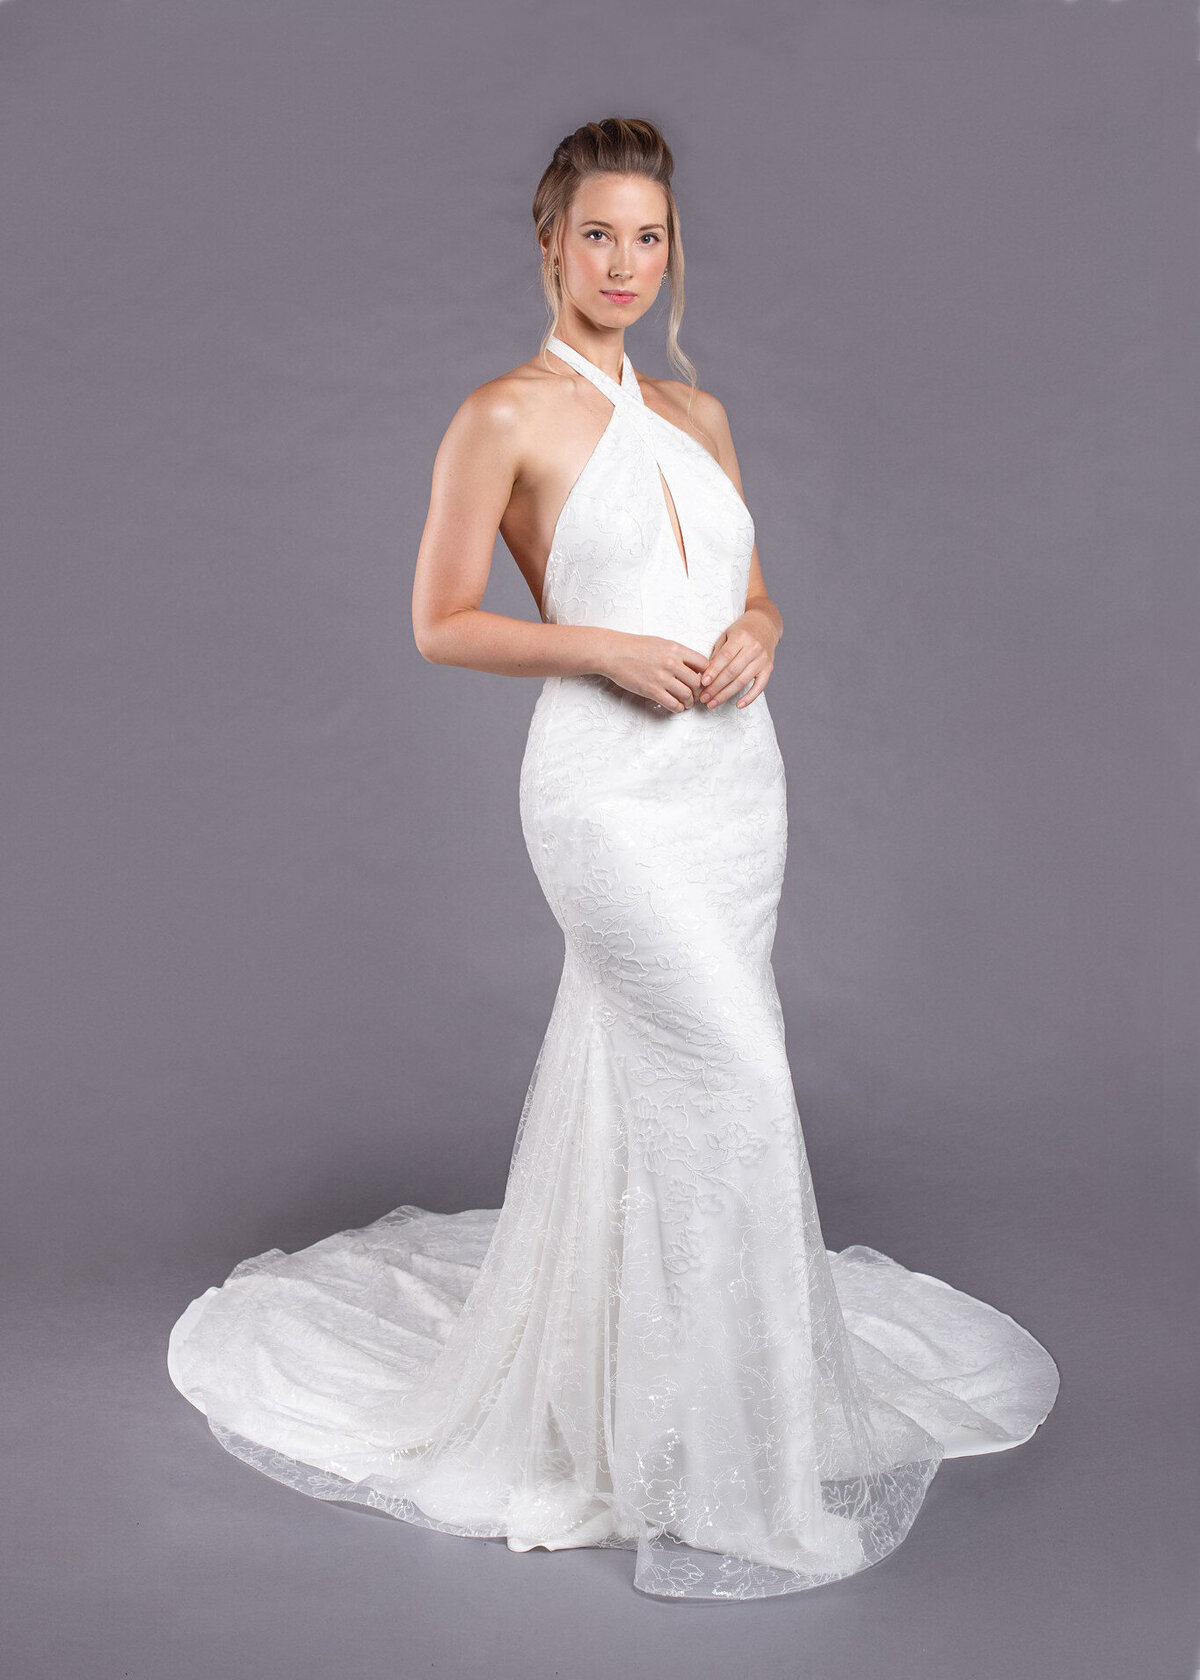 The Marlene bridal style by Edith Elan is a halter mermaid wedding dress with a sparkly floral lace layer on top of crepe.